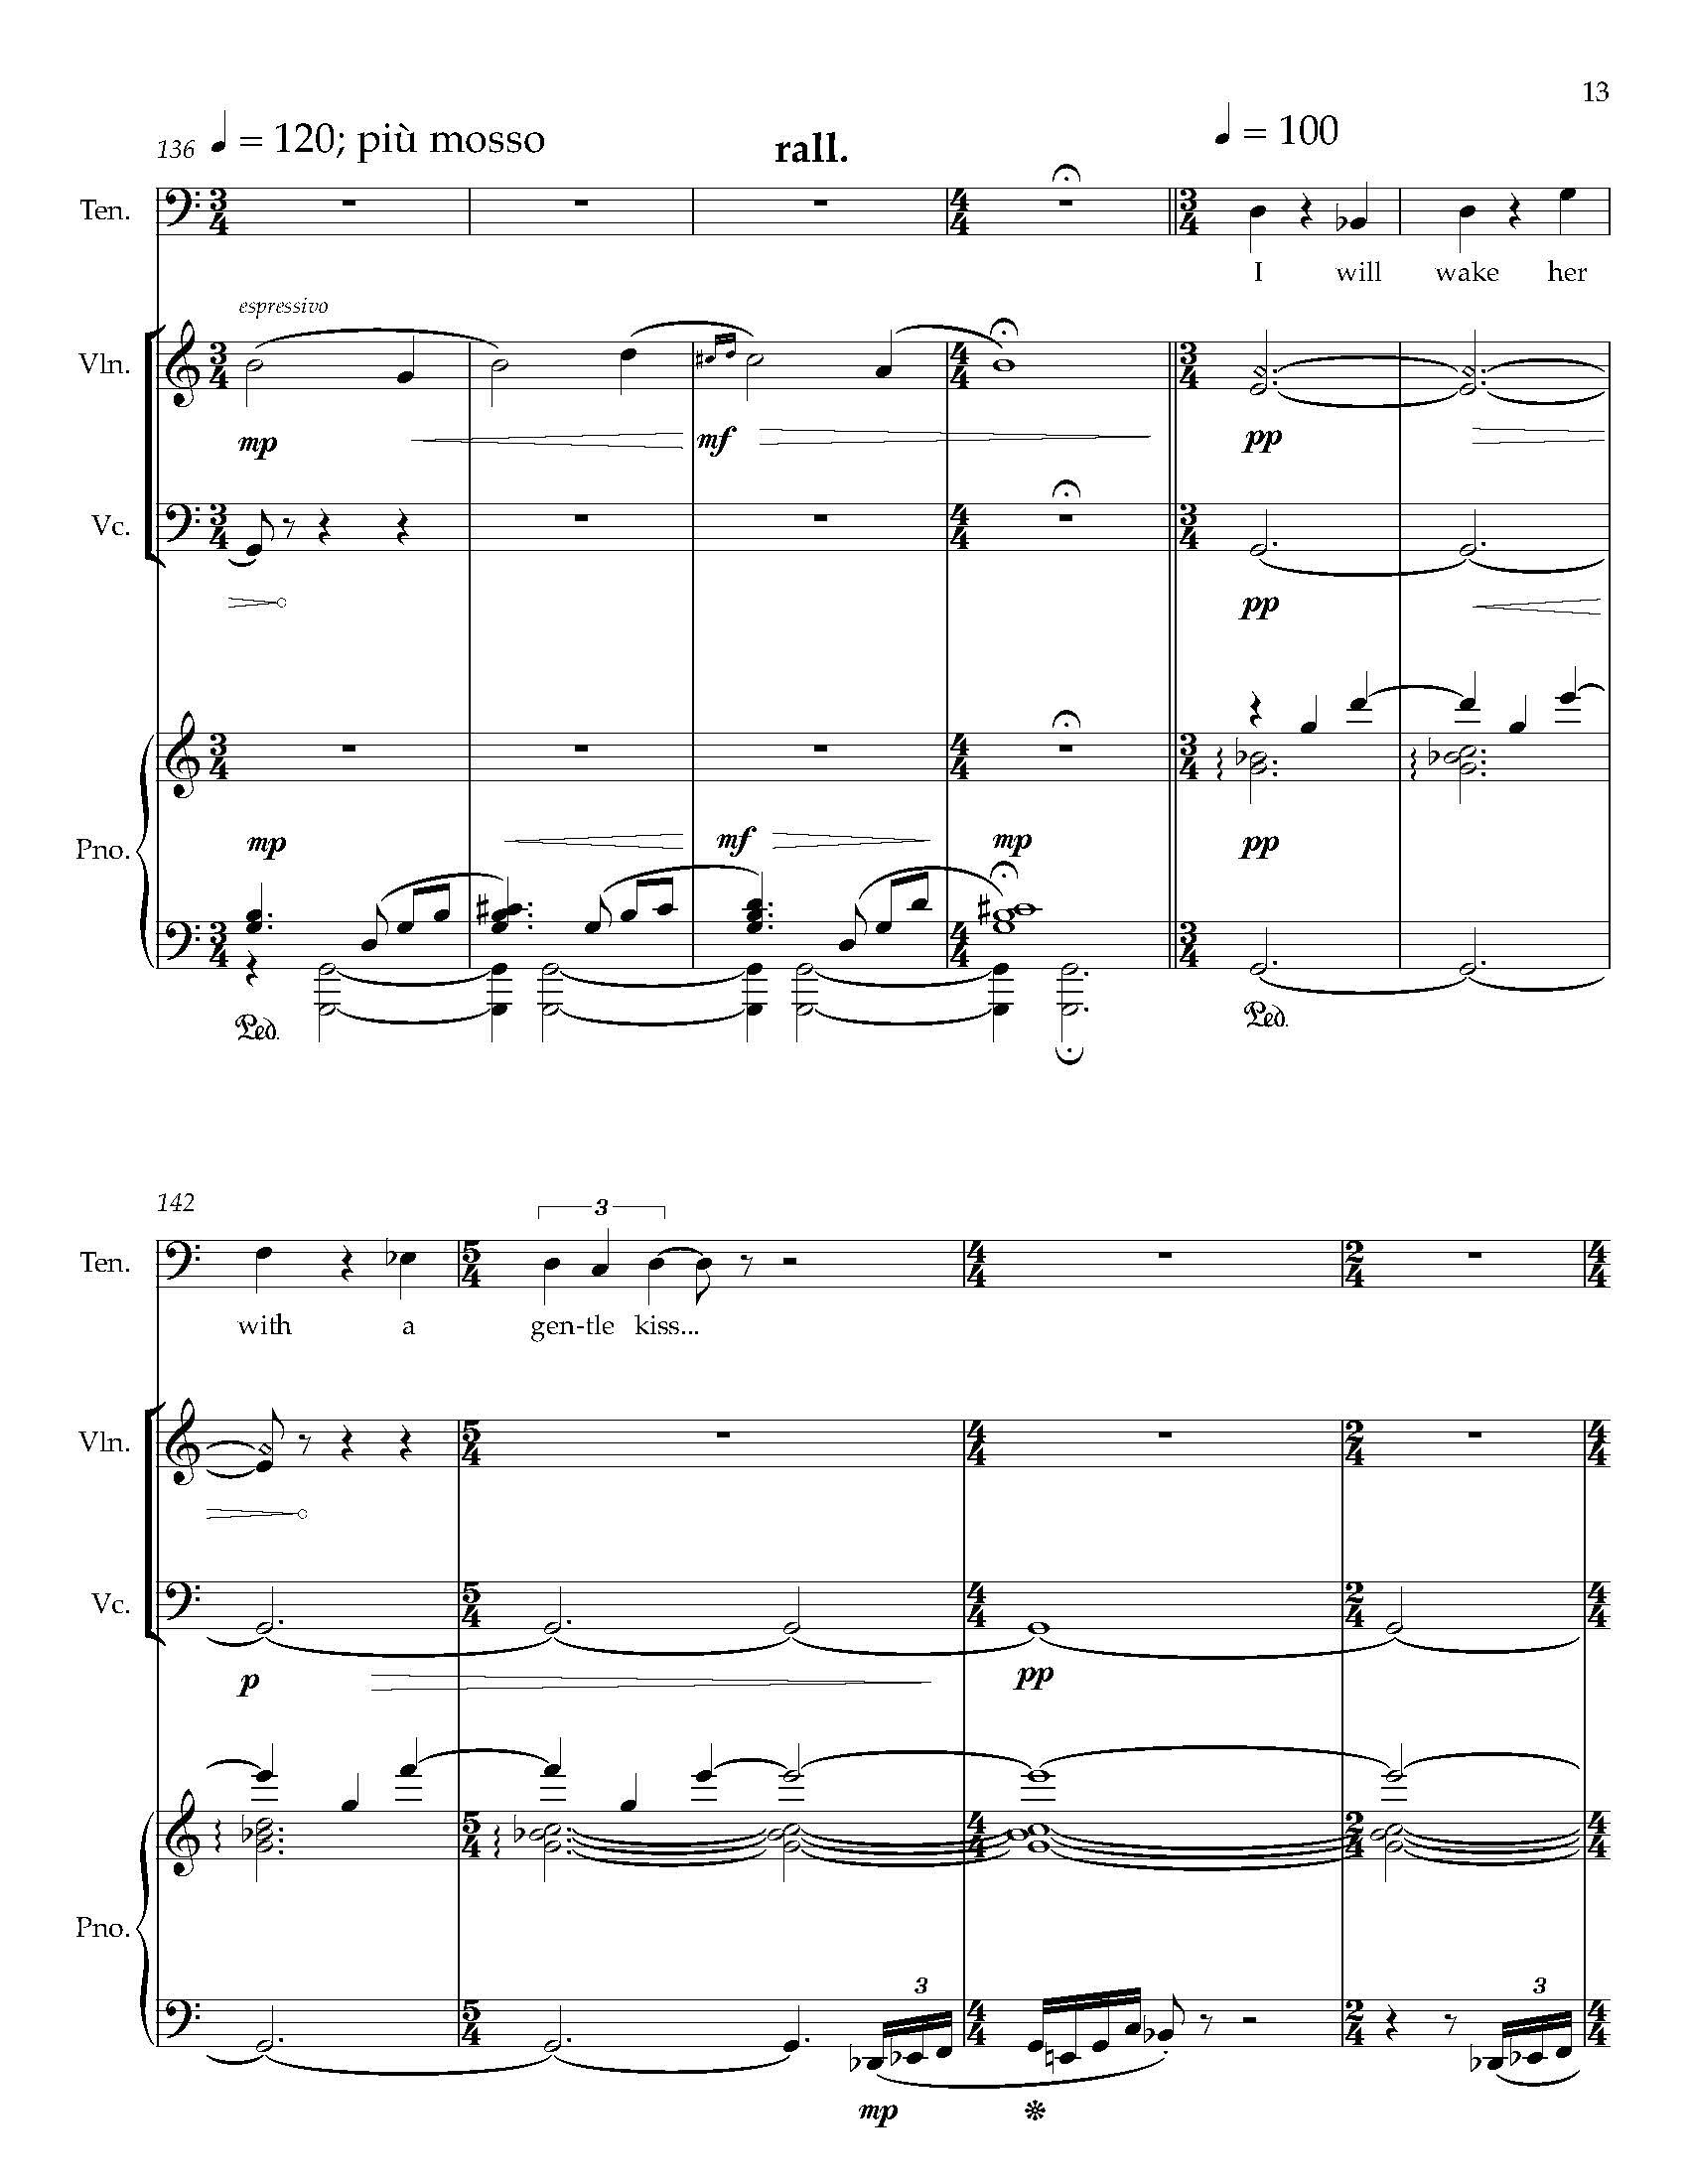 Gursky Songs - Complete Score_Page_21.jpg